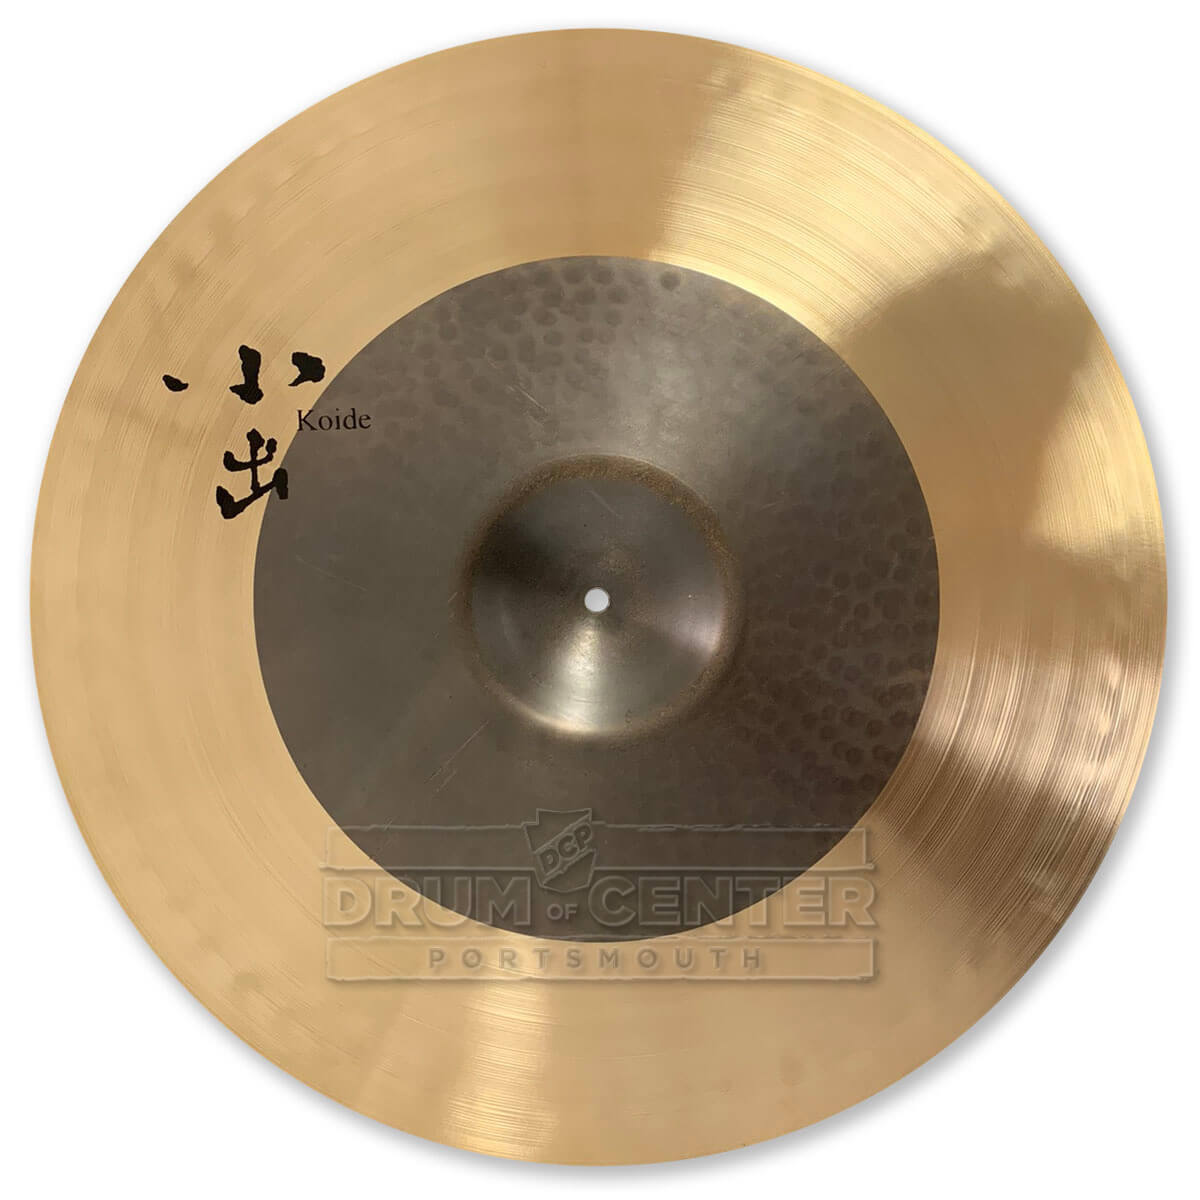 Koide 10J Turk Ride Cymbal 22" 2875 grams - Drum Center Of Portsmouth